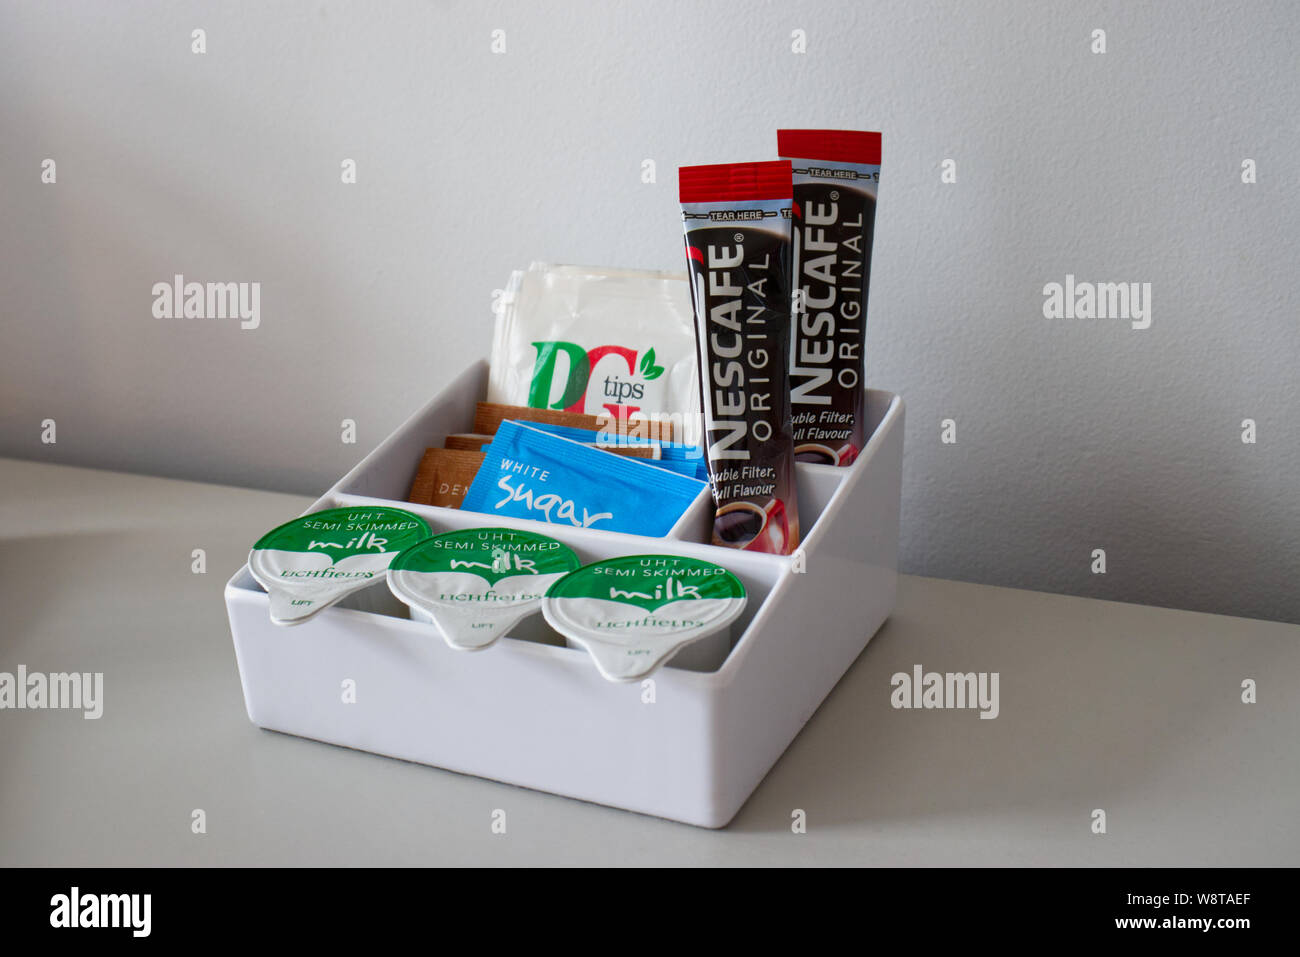 https://c8.alamy.com/comp/W8TAEF/individual-teacoffee-milk-and-sugar-servings-in-a-receptacle-of-the-kind-typically-found-in-hotel-rooms-W8TAEF.jpg